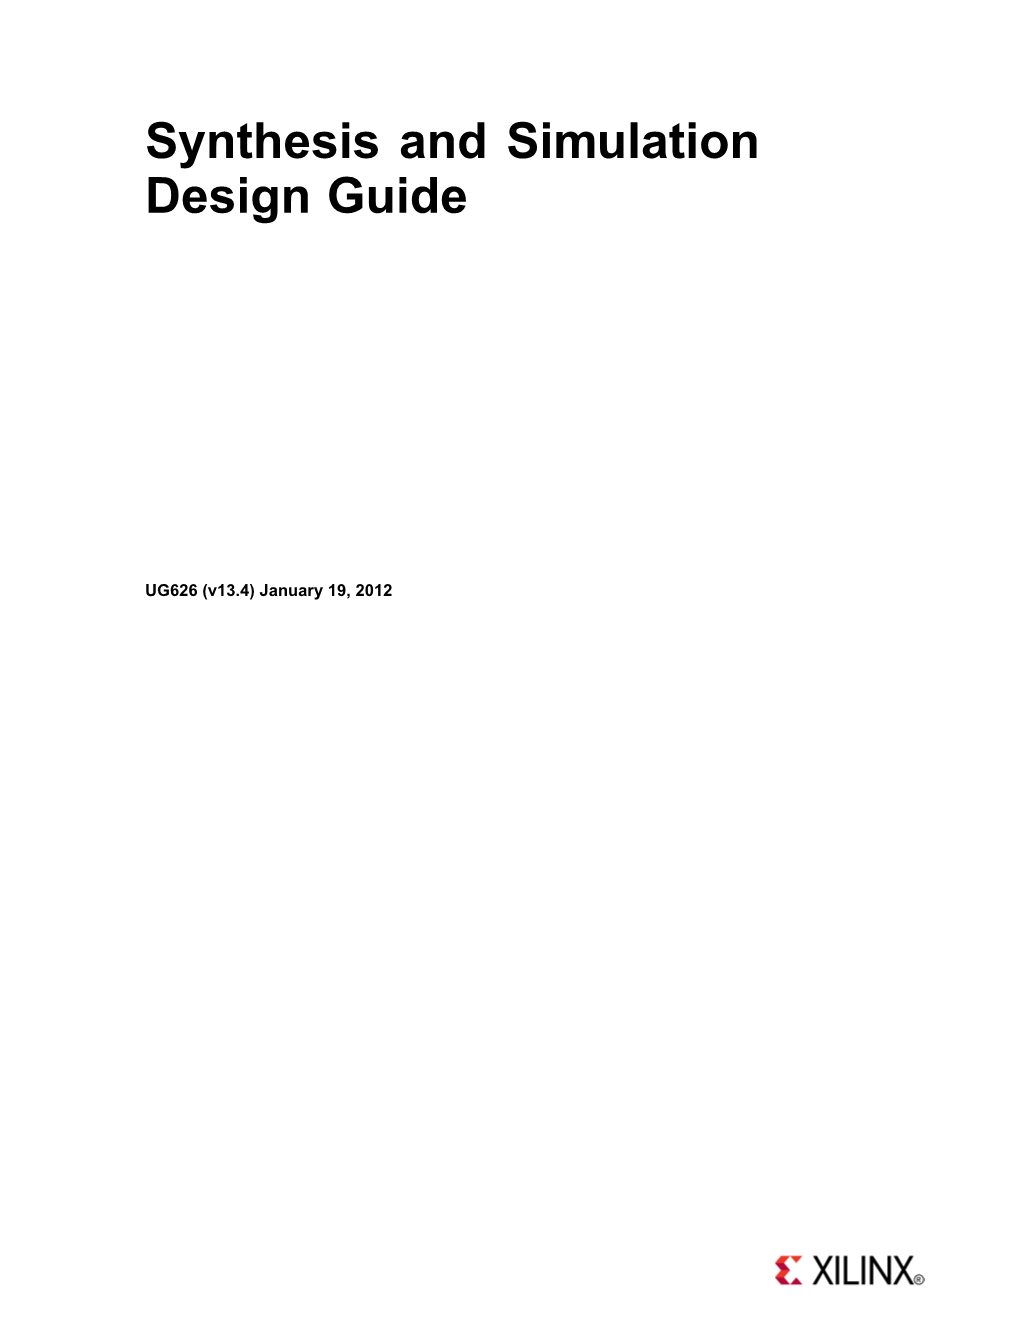 Xilinx Synthesis and Simulation Design Guide